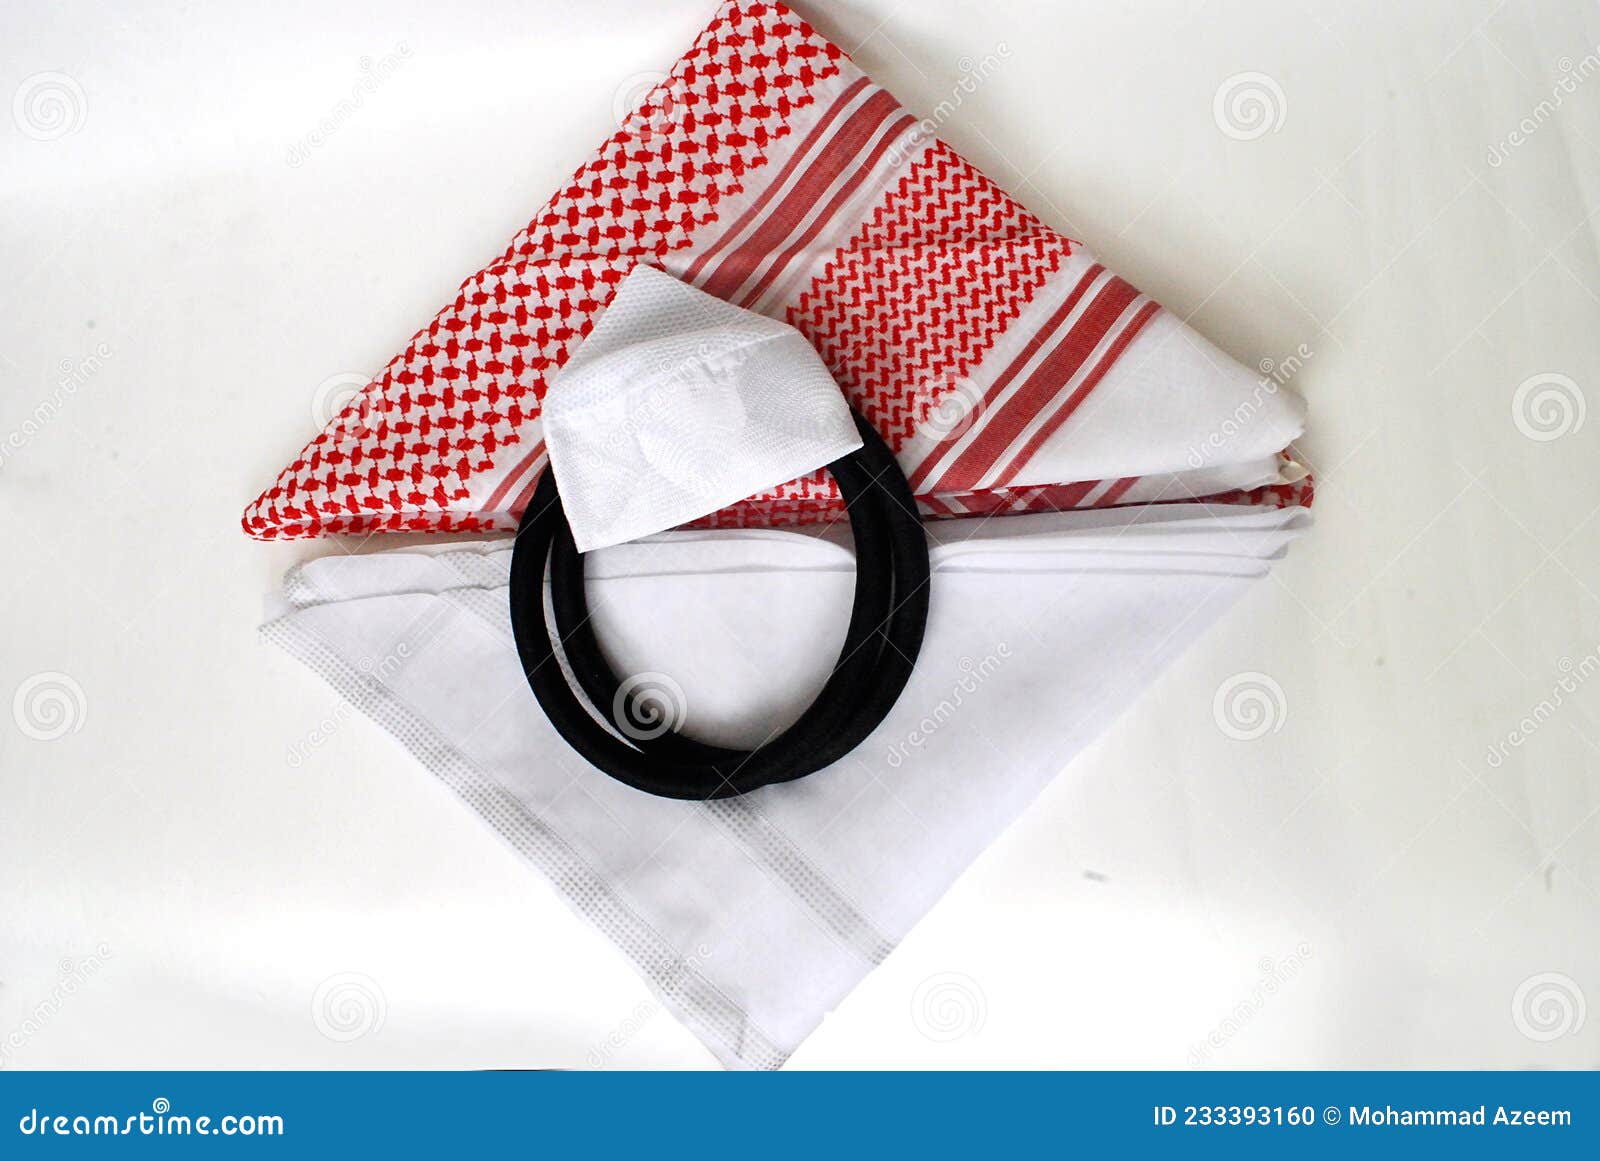 Arabic Traditional Clothing Accessories Agal, Islamic Cap and Rosary ...